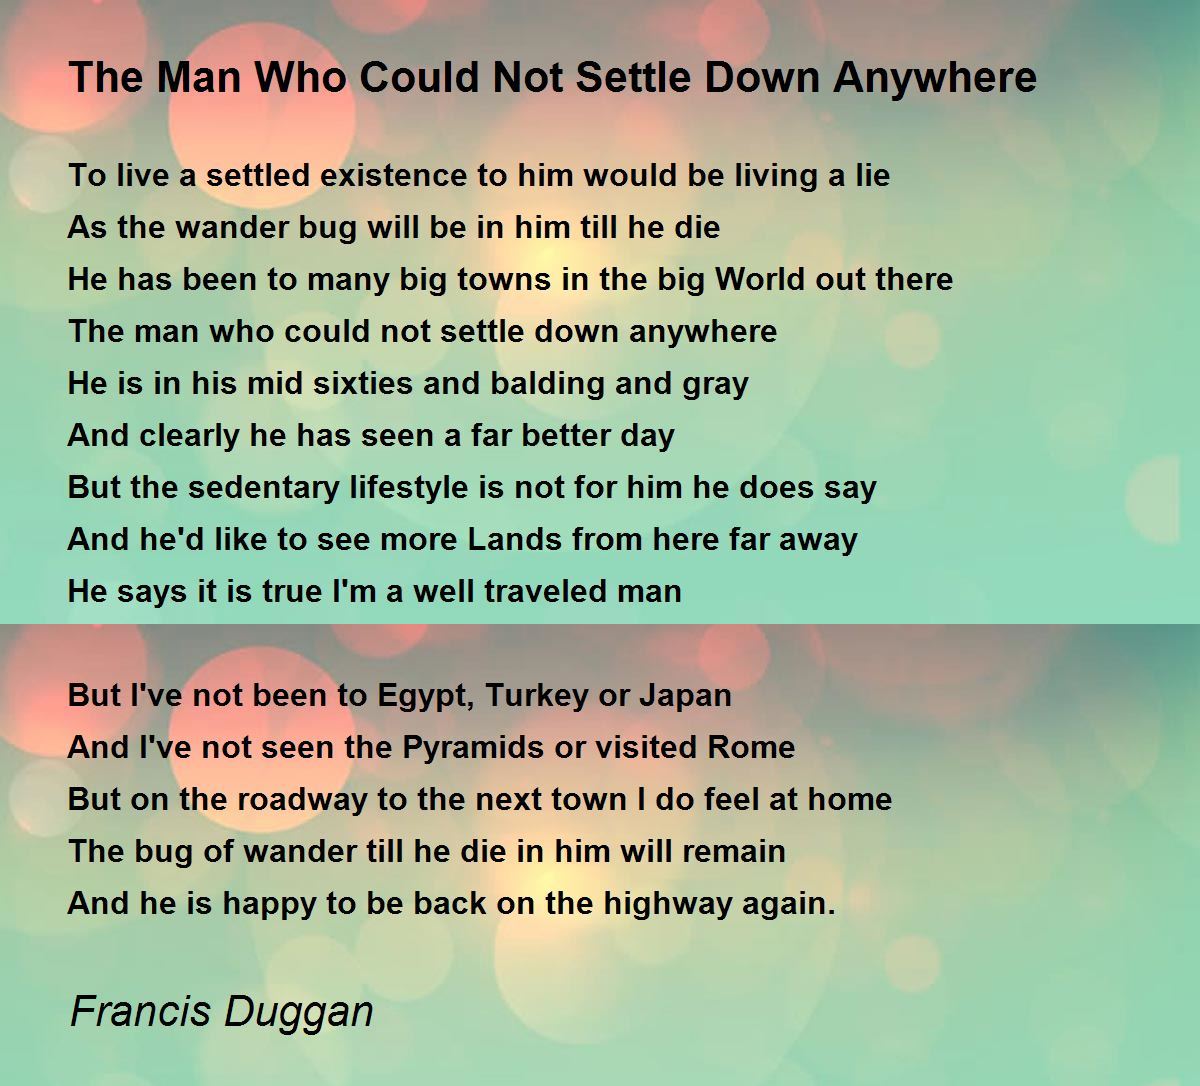 The Man Who Could Not Settle Down Anywhere - The Man Who Could Not Settle  Down Anywhere Poem by Francis Duggan